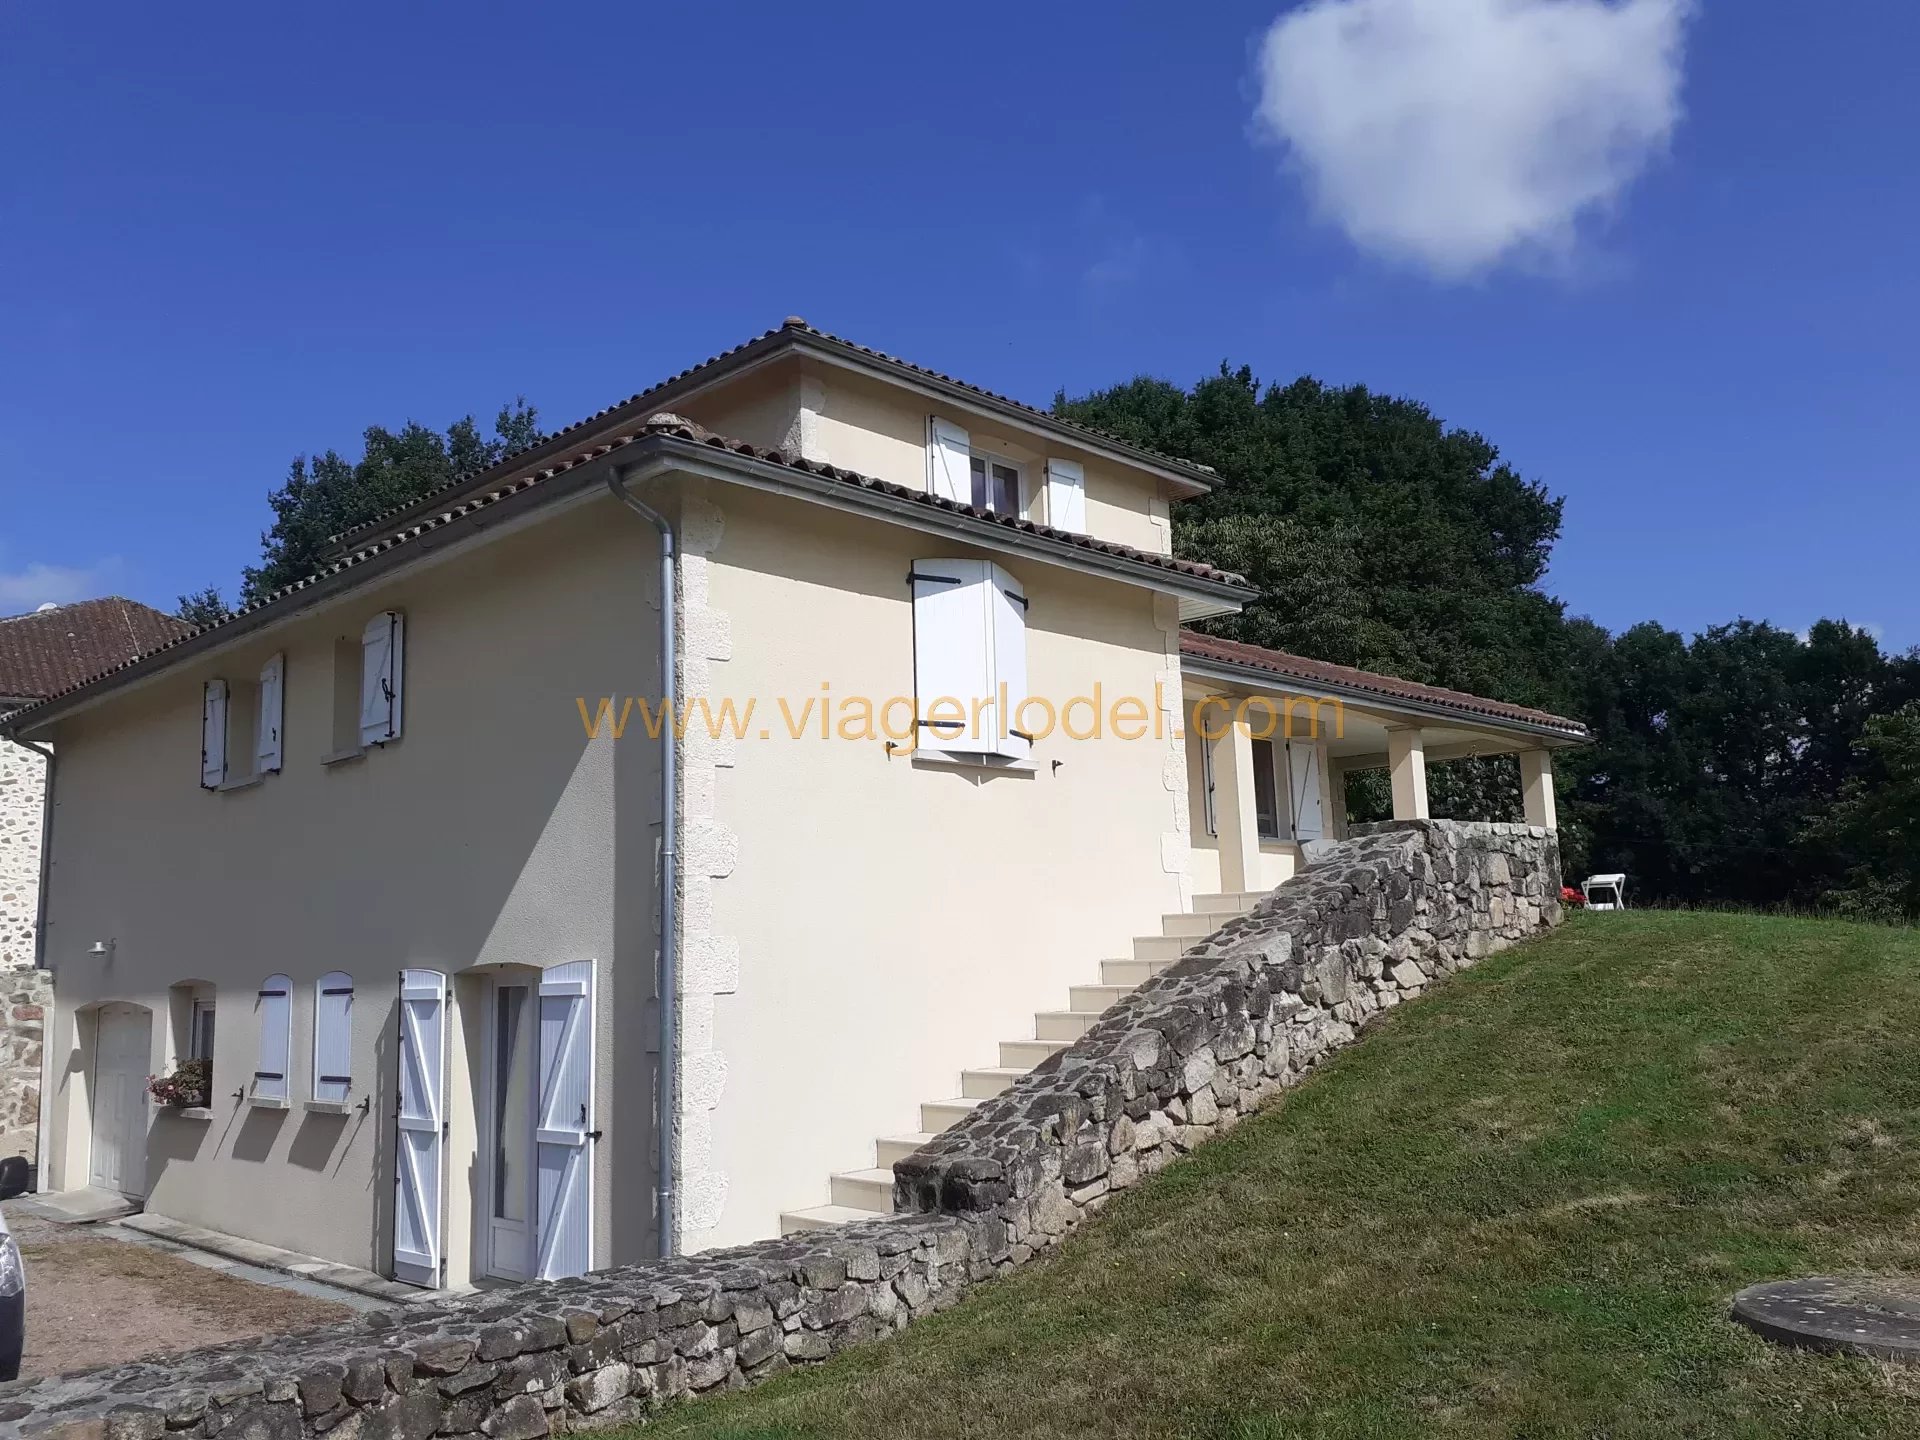 Ref.: 9195 - LIFE ANNUITY - SAINT MATHIEU (87) - Occupied and rented houses